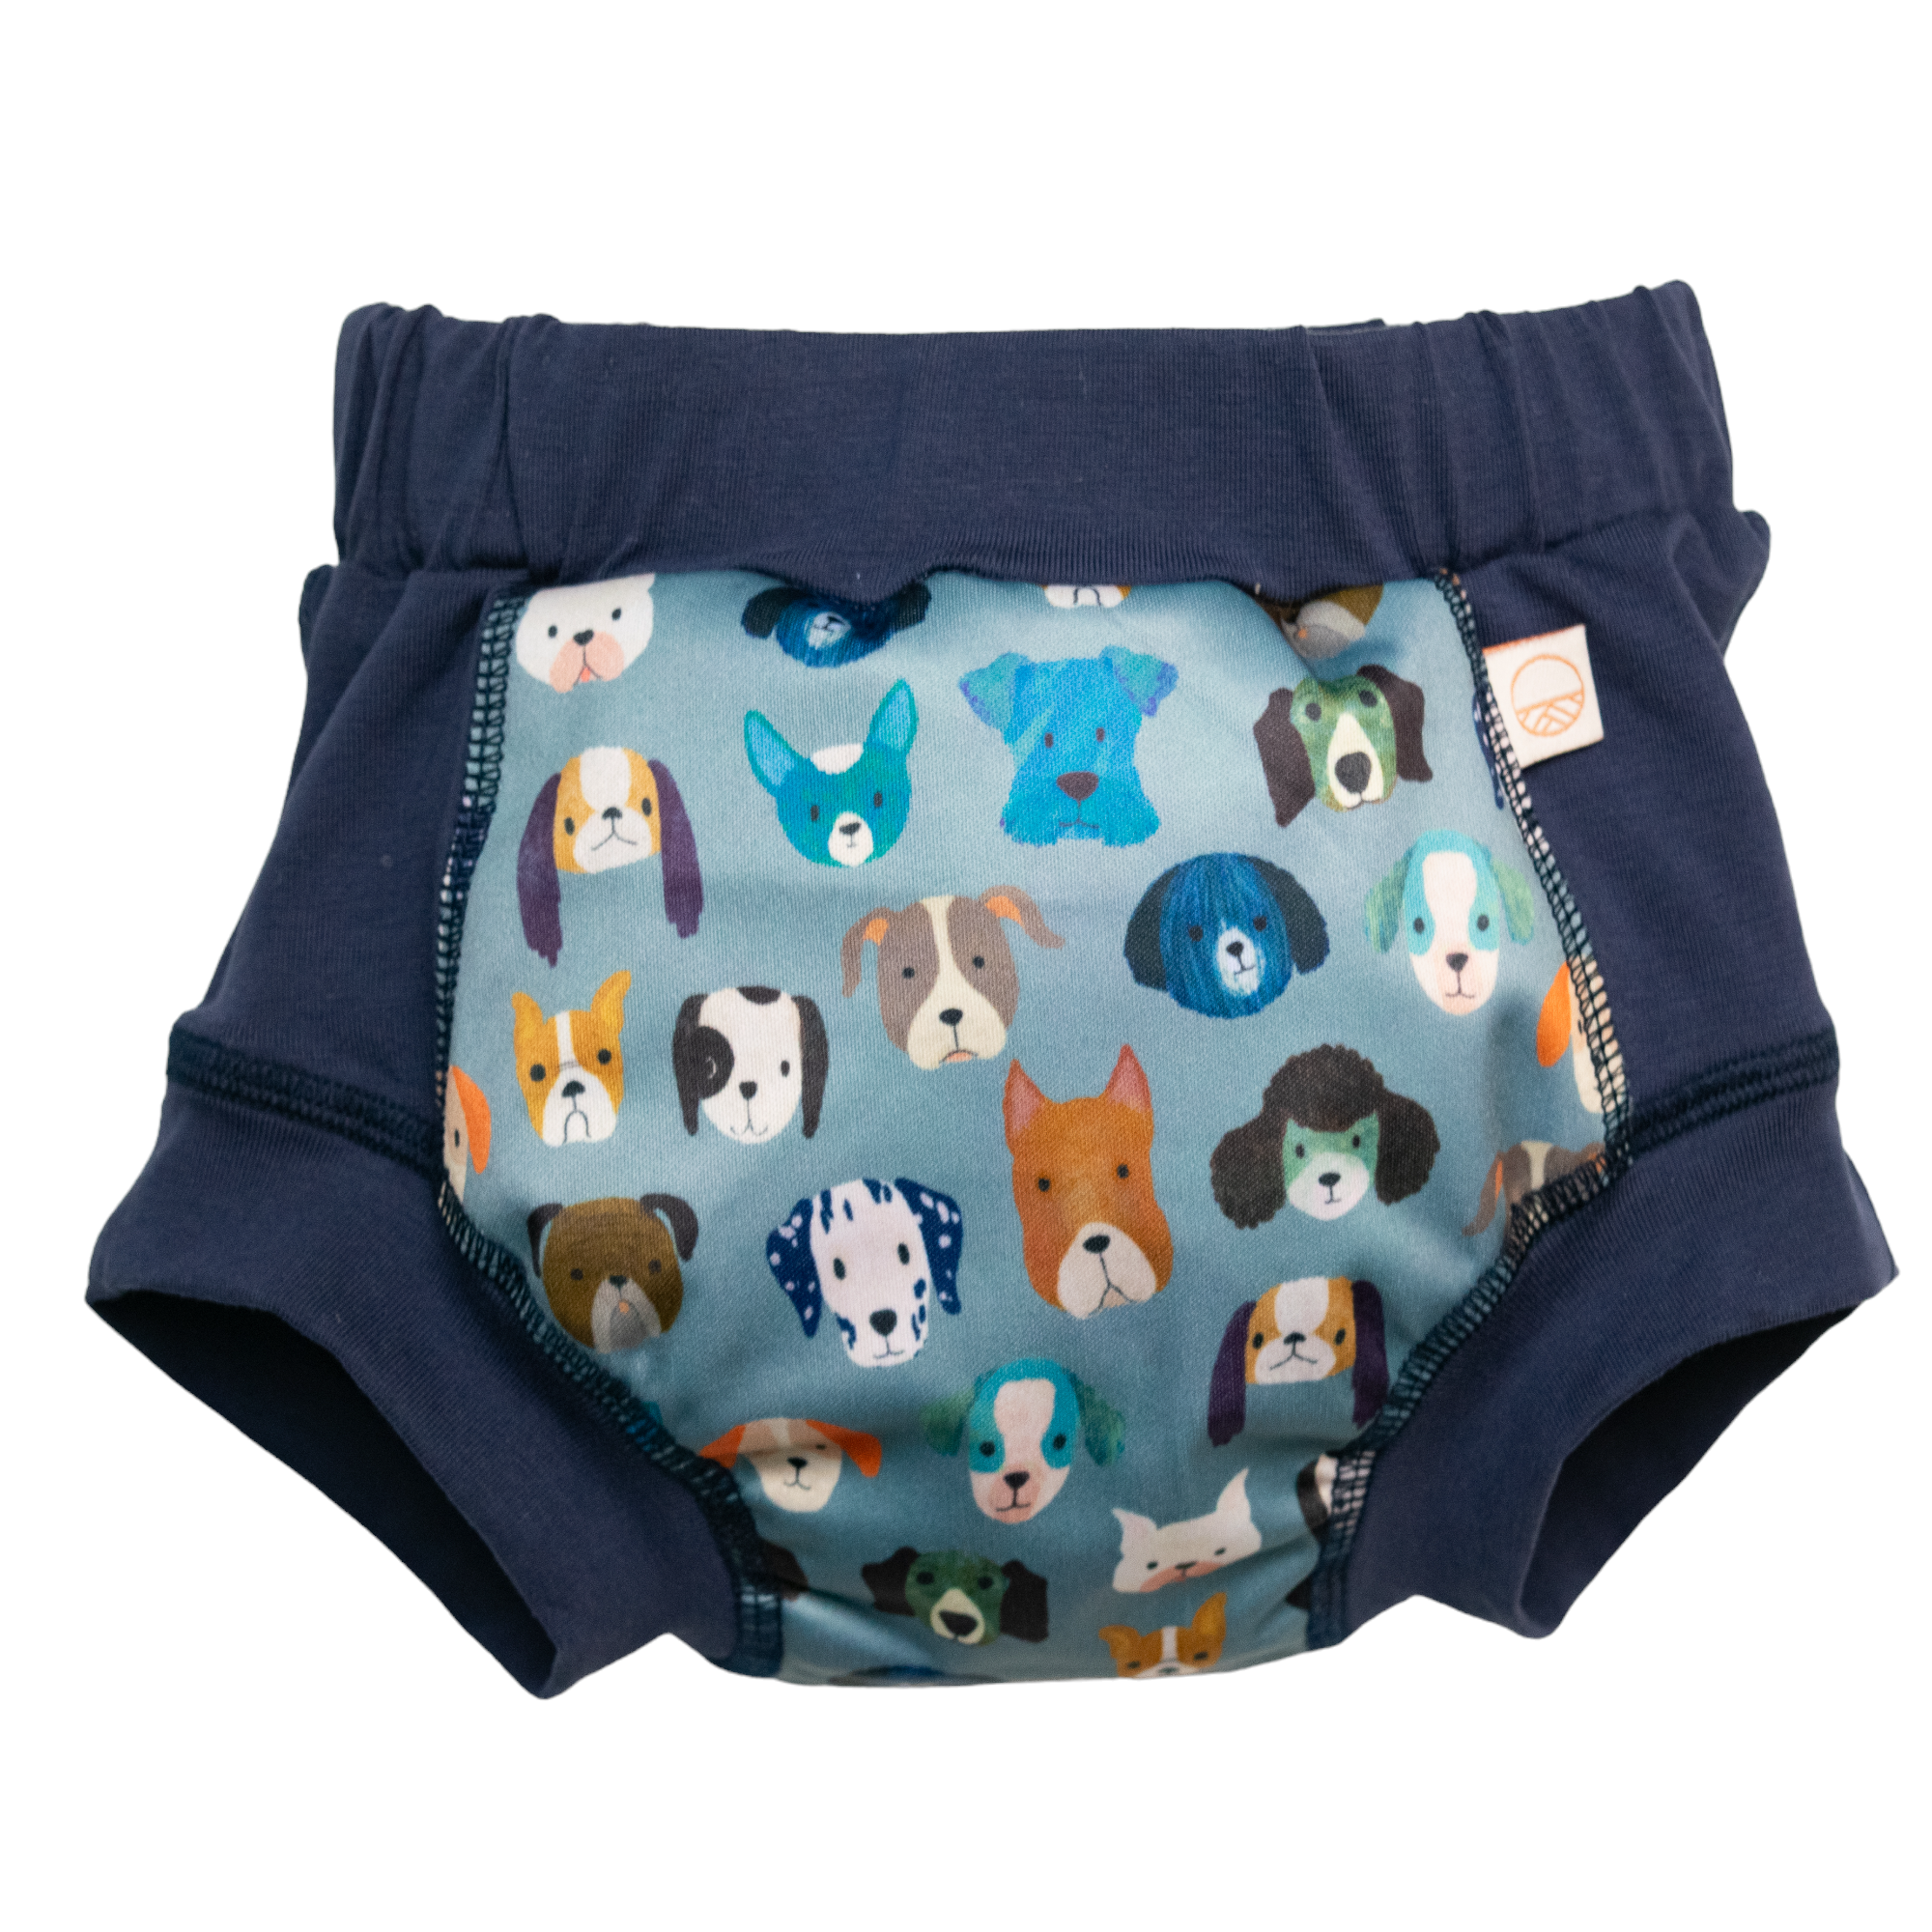 Wee Pants Training Undies - All the Dogs